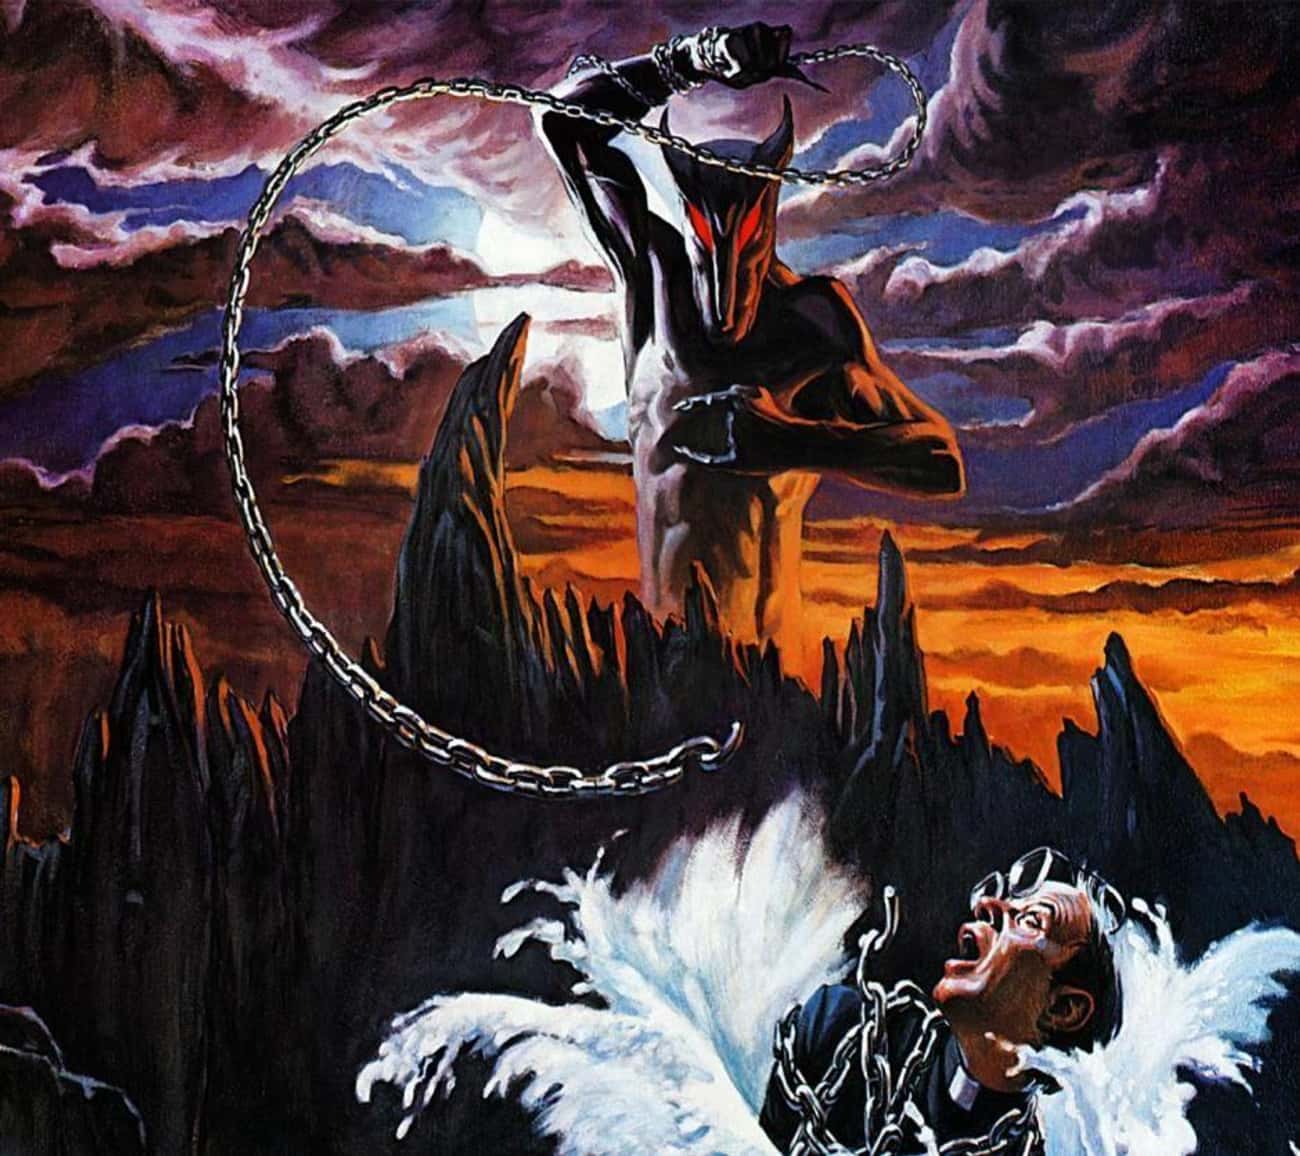 'Holy Diver' By Ronnie James Dio